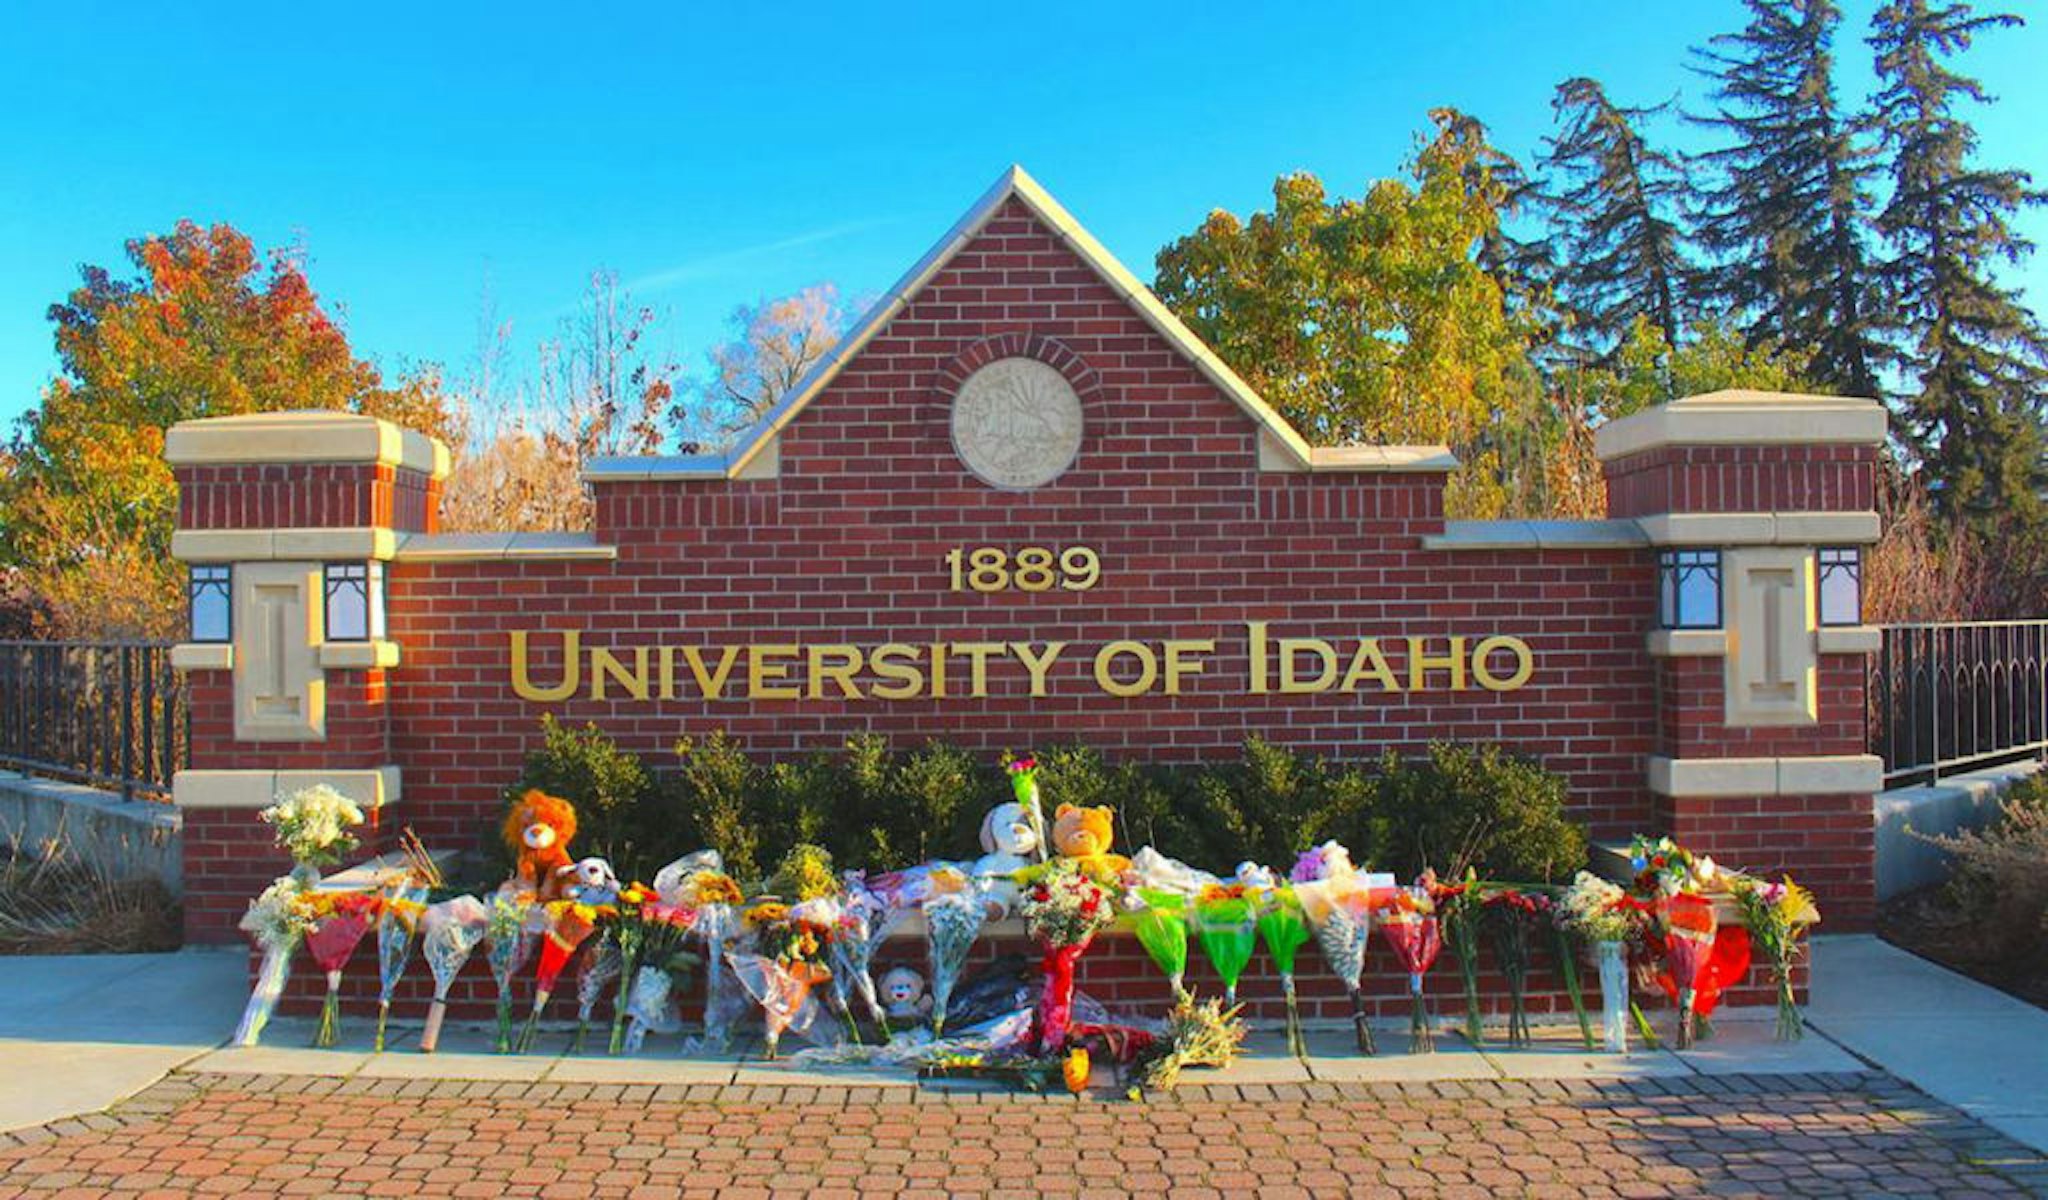 Flowers, notes and stuffed animals sit along the University of Idaho's entrance sign on Pullman Road in Moscow to honor the four students stabbed to death in an off-campus home on Nov. 13